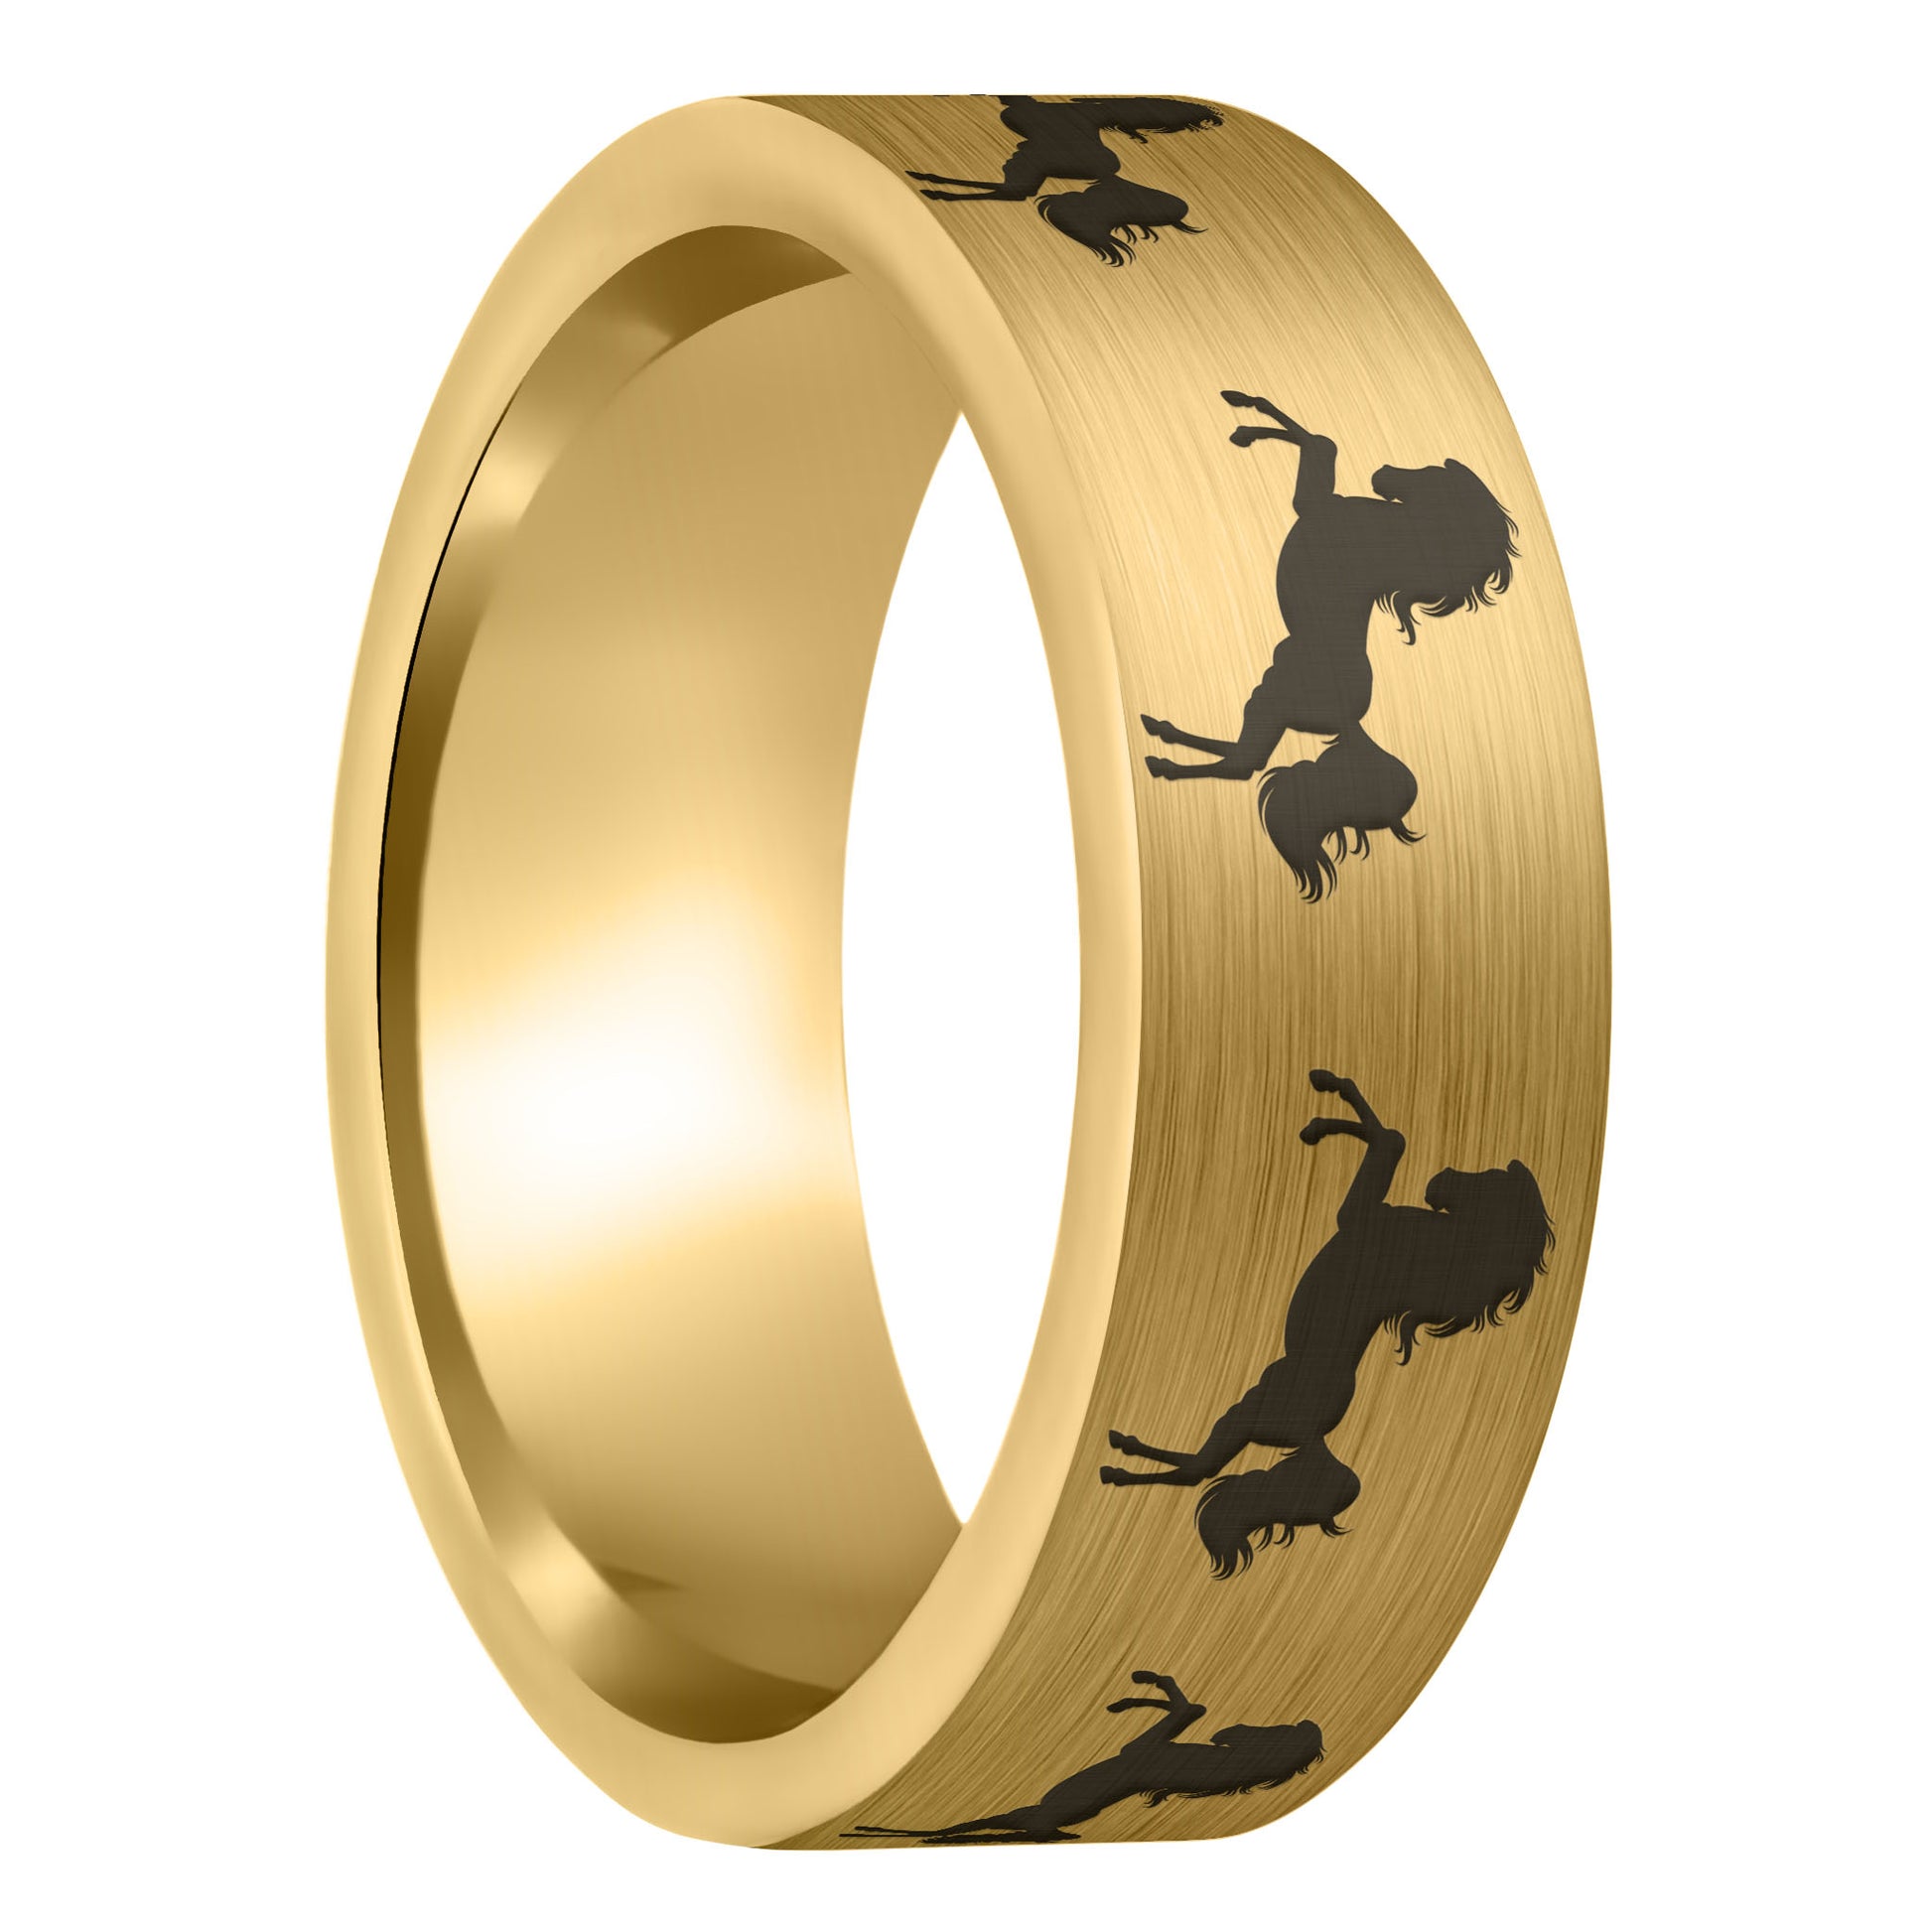 A rearing horse brushed gold tungsten men's wedding band displayed on a plain white background.